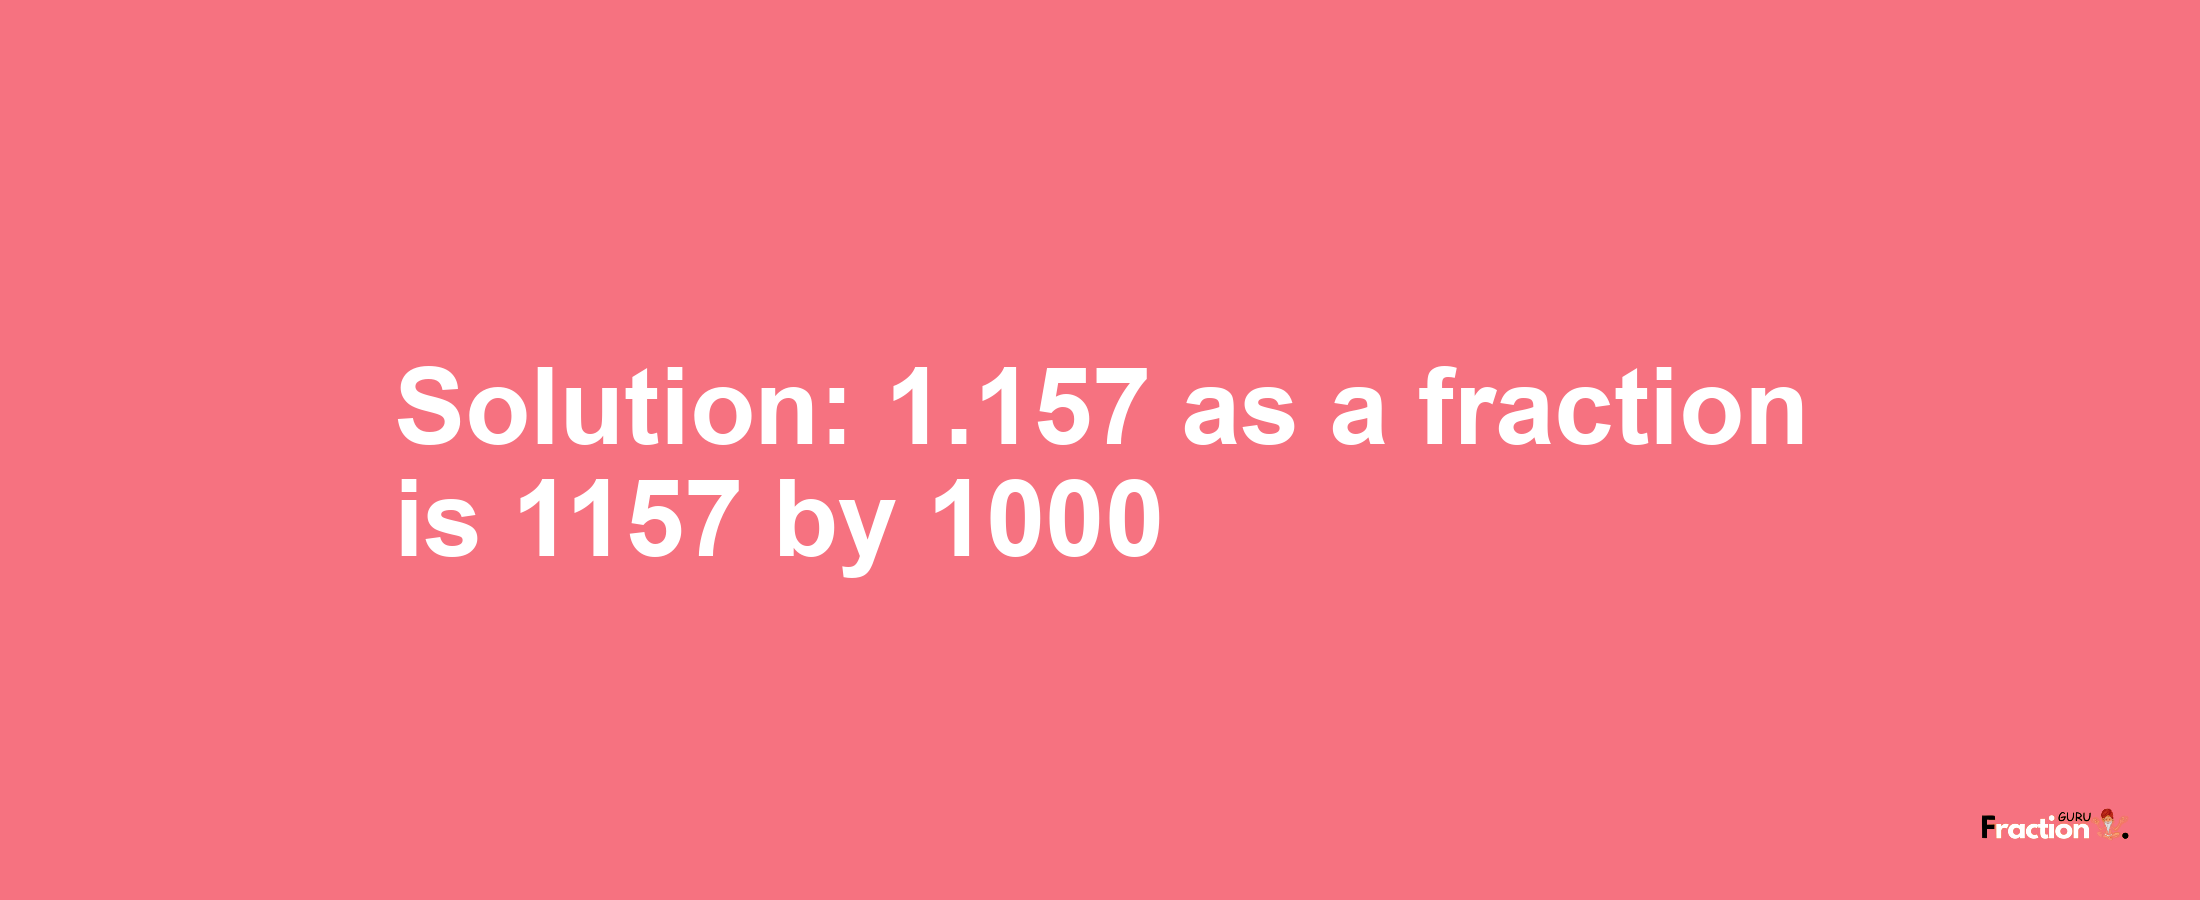 Solution:1.157 as a fraction is 1157/1000